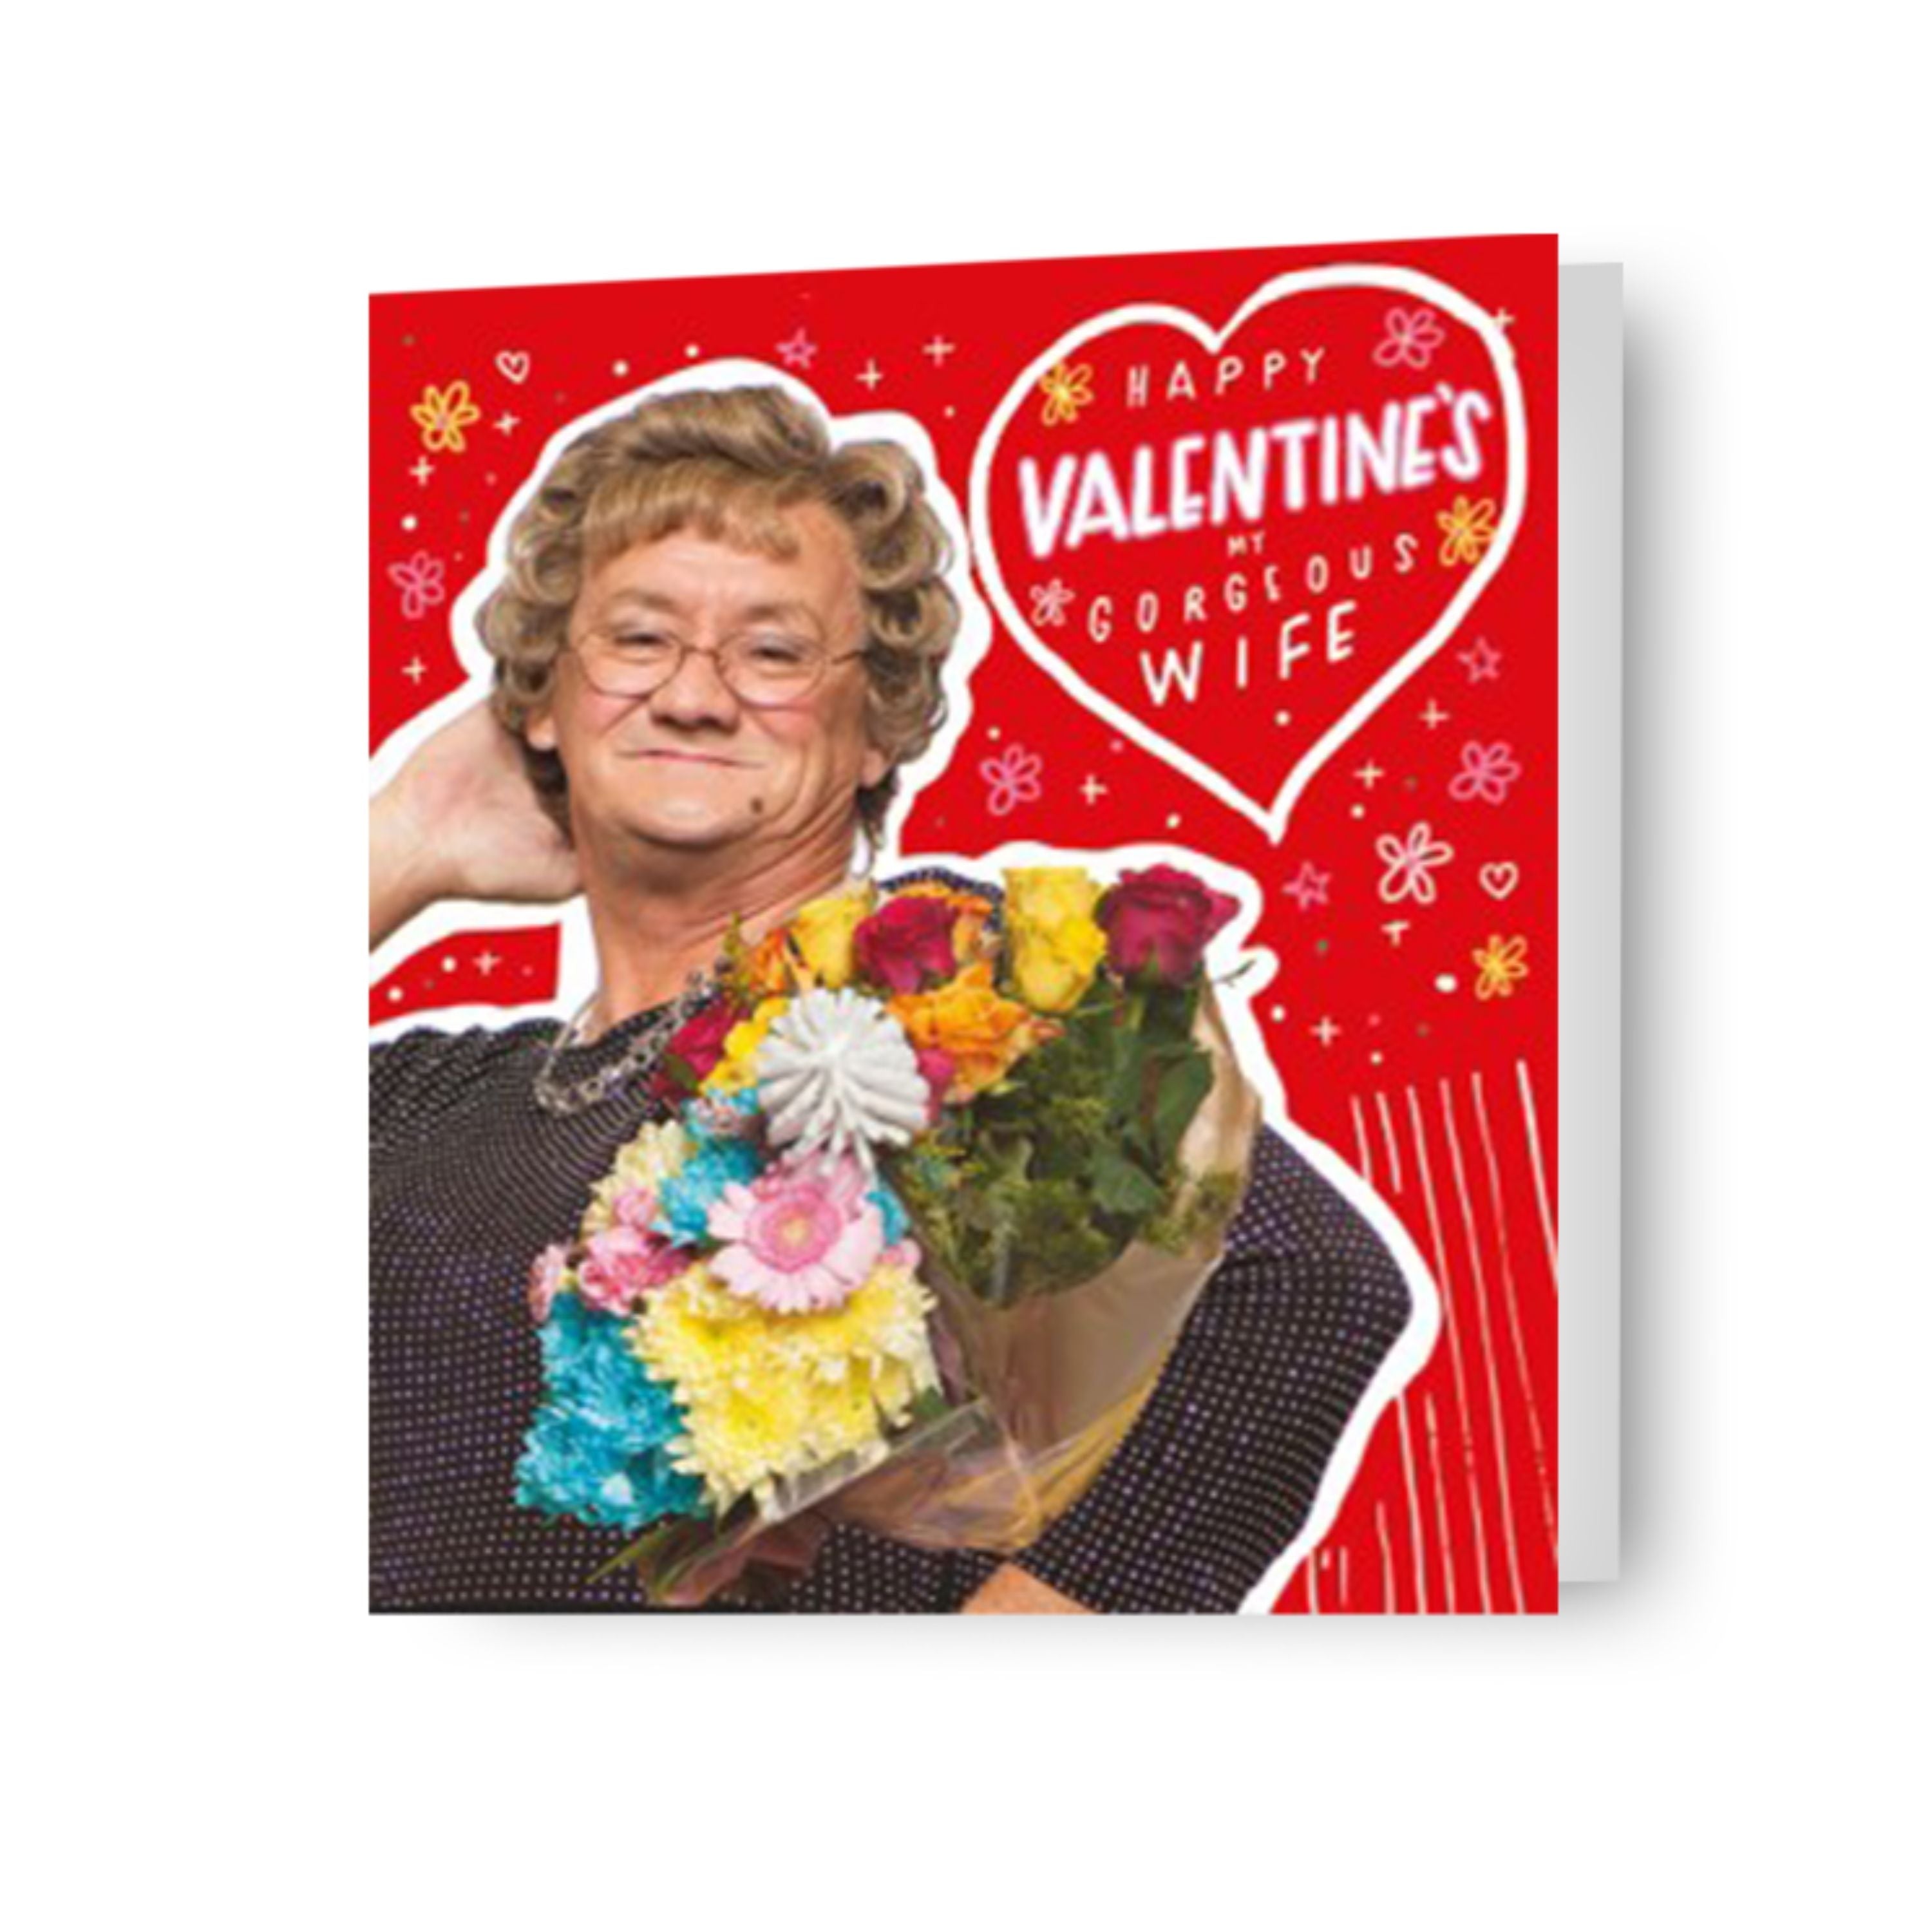 Mrs Browns Boys Gorgeous Wife Valentines Day Card Danilo Promotions 7328